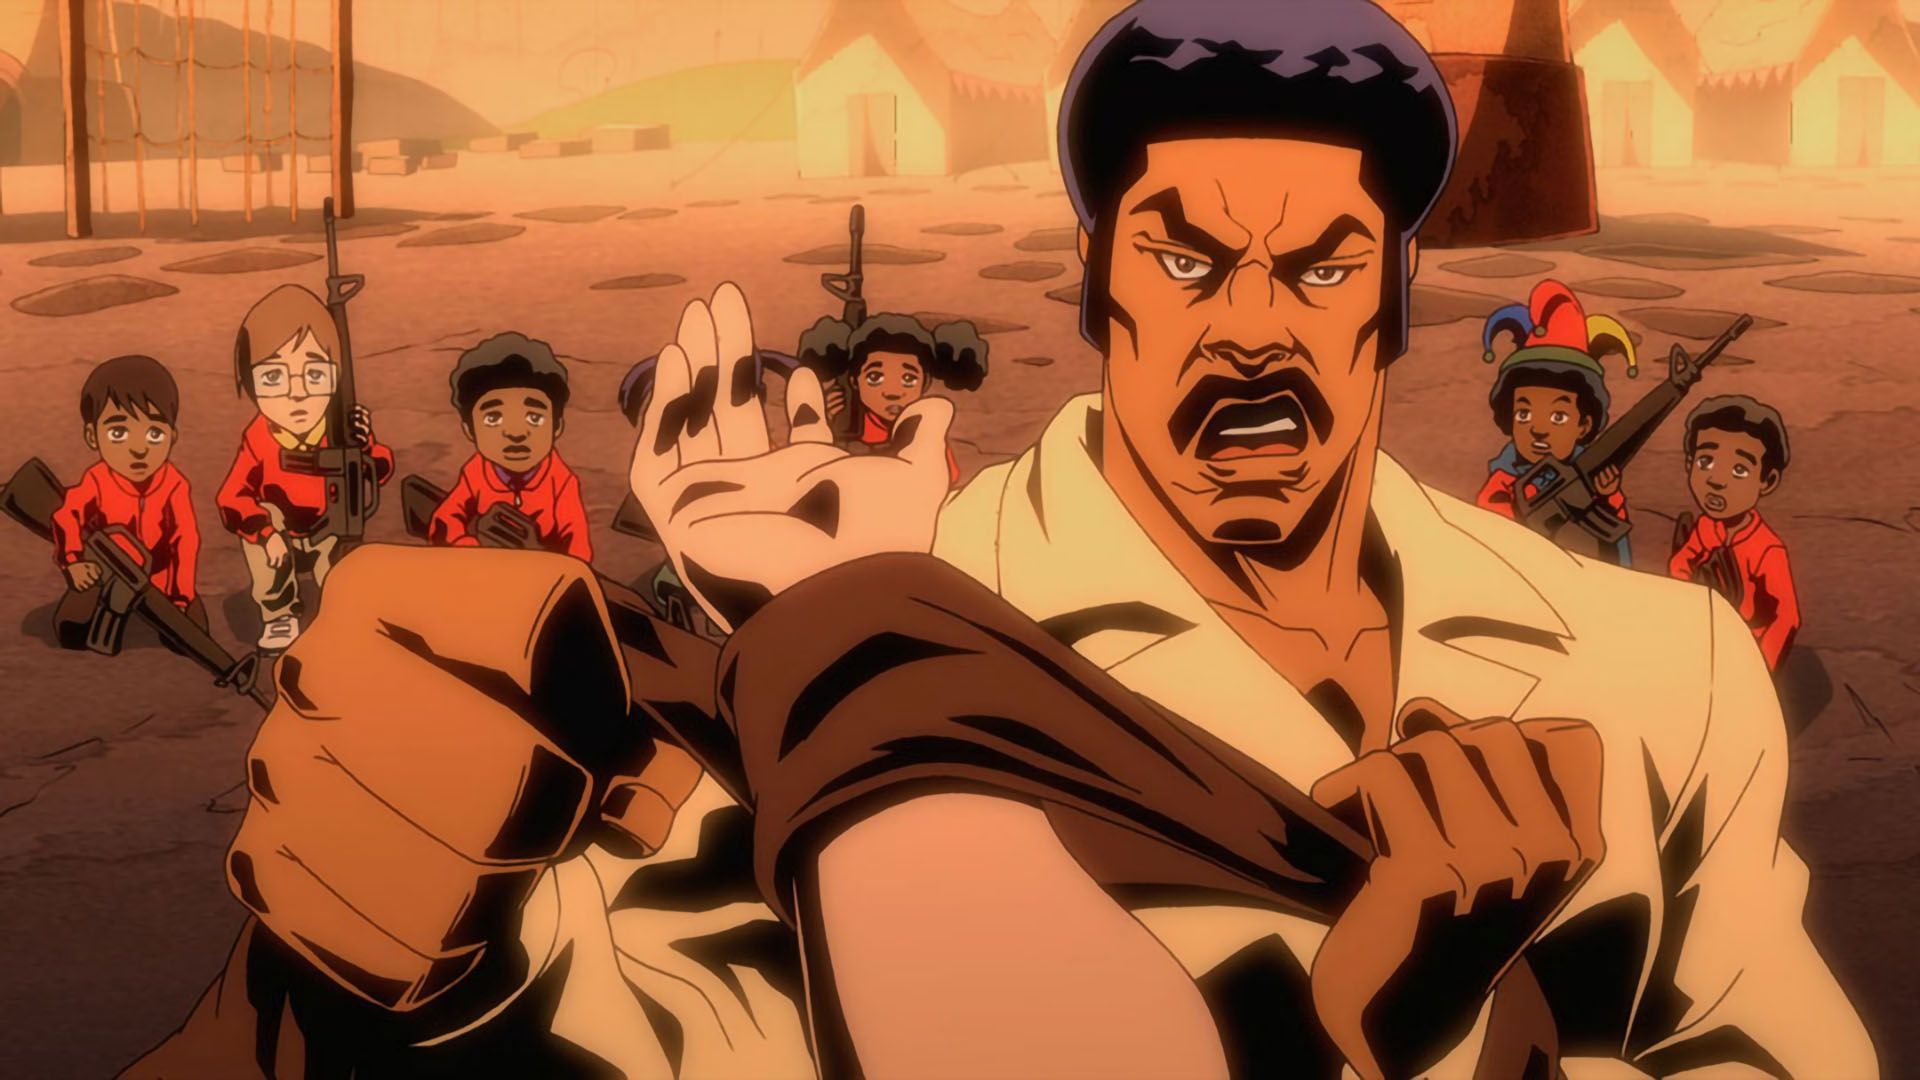 On the Orphans' collective birthday, Black Dynamite brings them all to...